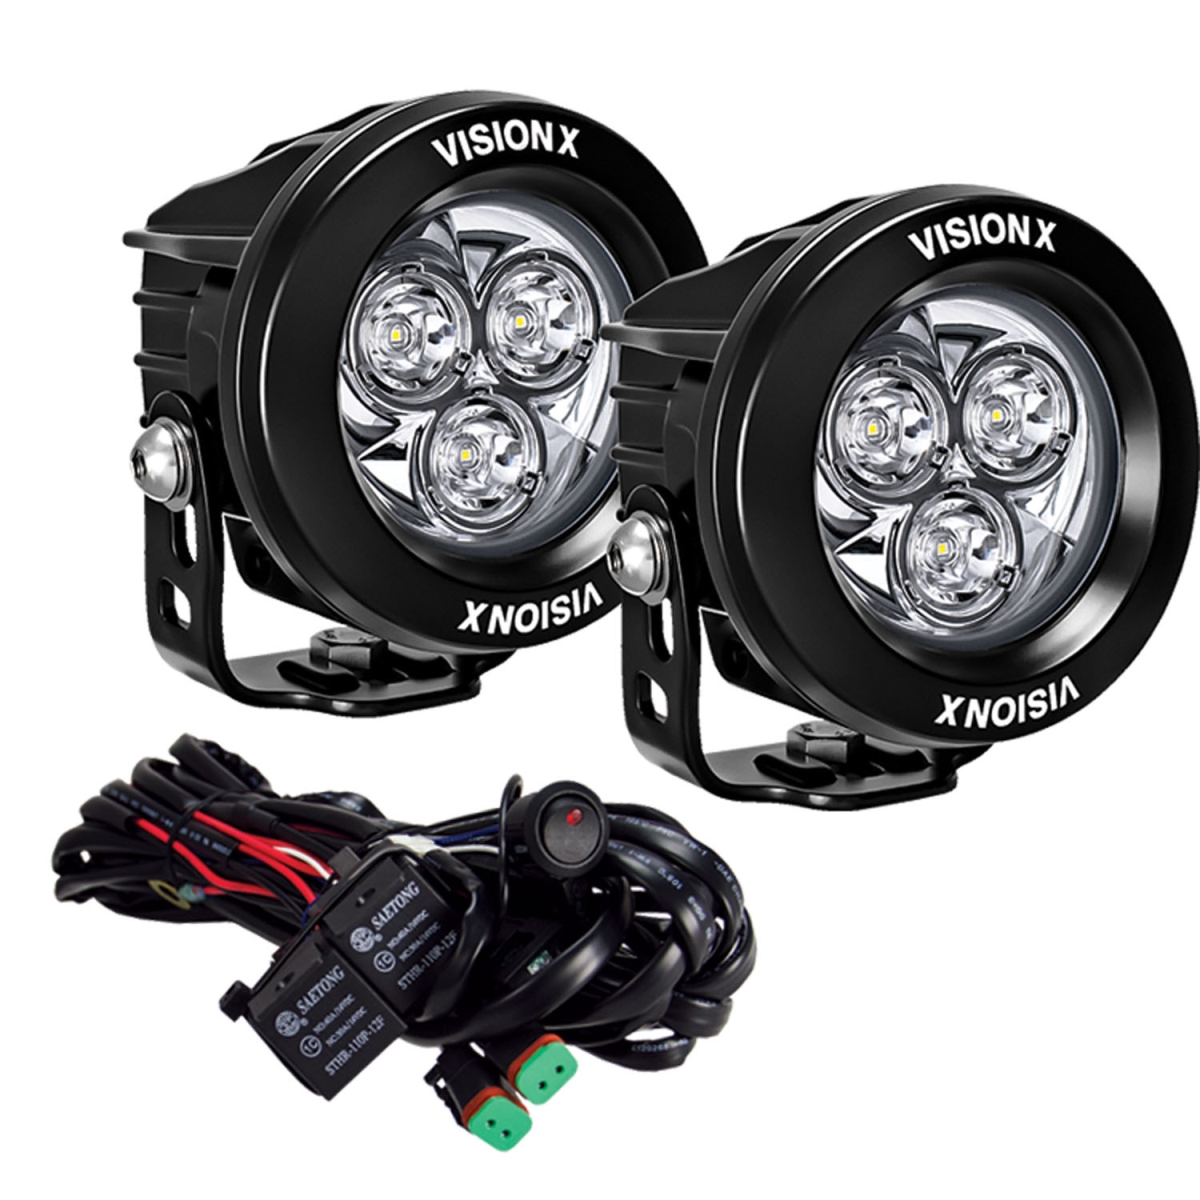 Picture of Vision X Lighting CG2-CPM310KIT 3.7 in. 3 LED CG2 Mini Light Cannons Including Harness - Pack of 2